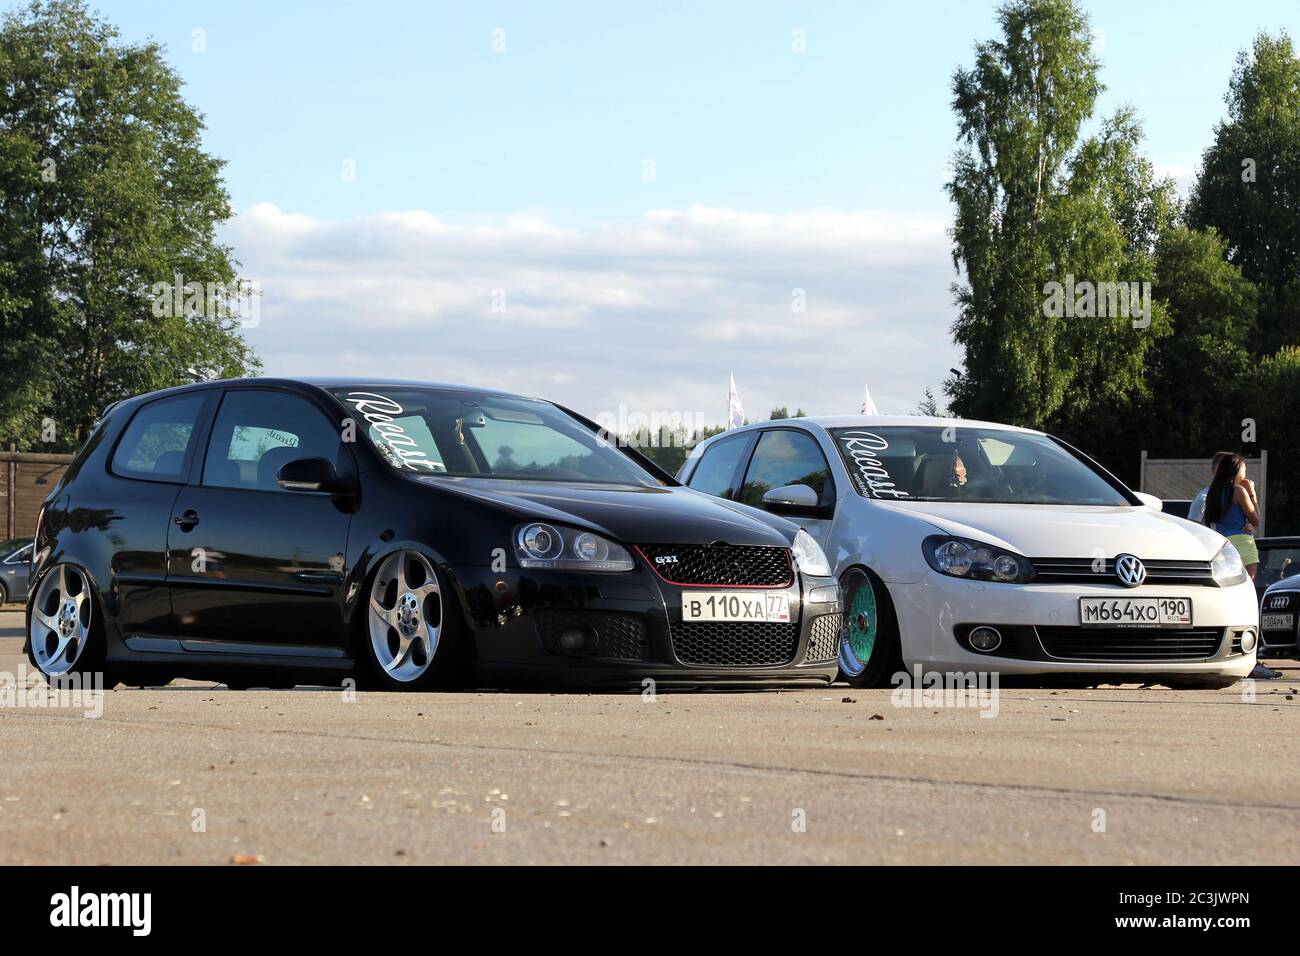 Moscow. Russia - May 20, 2019: Black Volkswagen Golf mk 5 and white mk 6 in tuning on air suspension, low and with wide wheels. They are parked on the street. Stock Photo